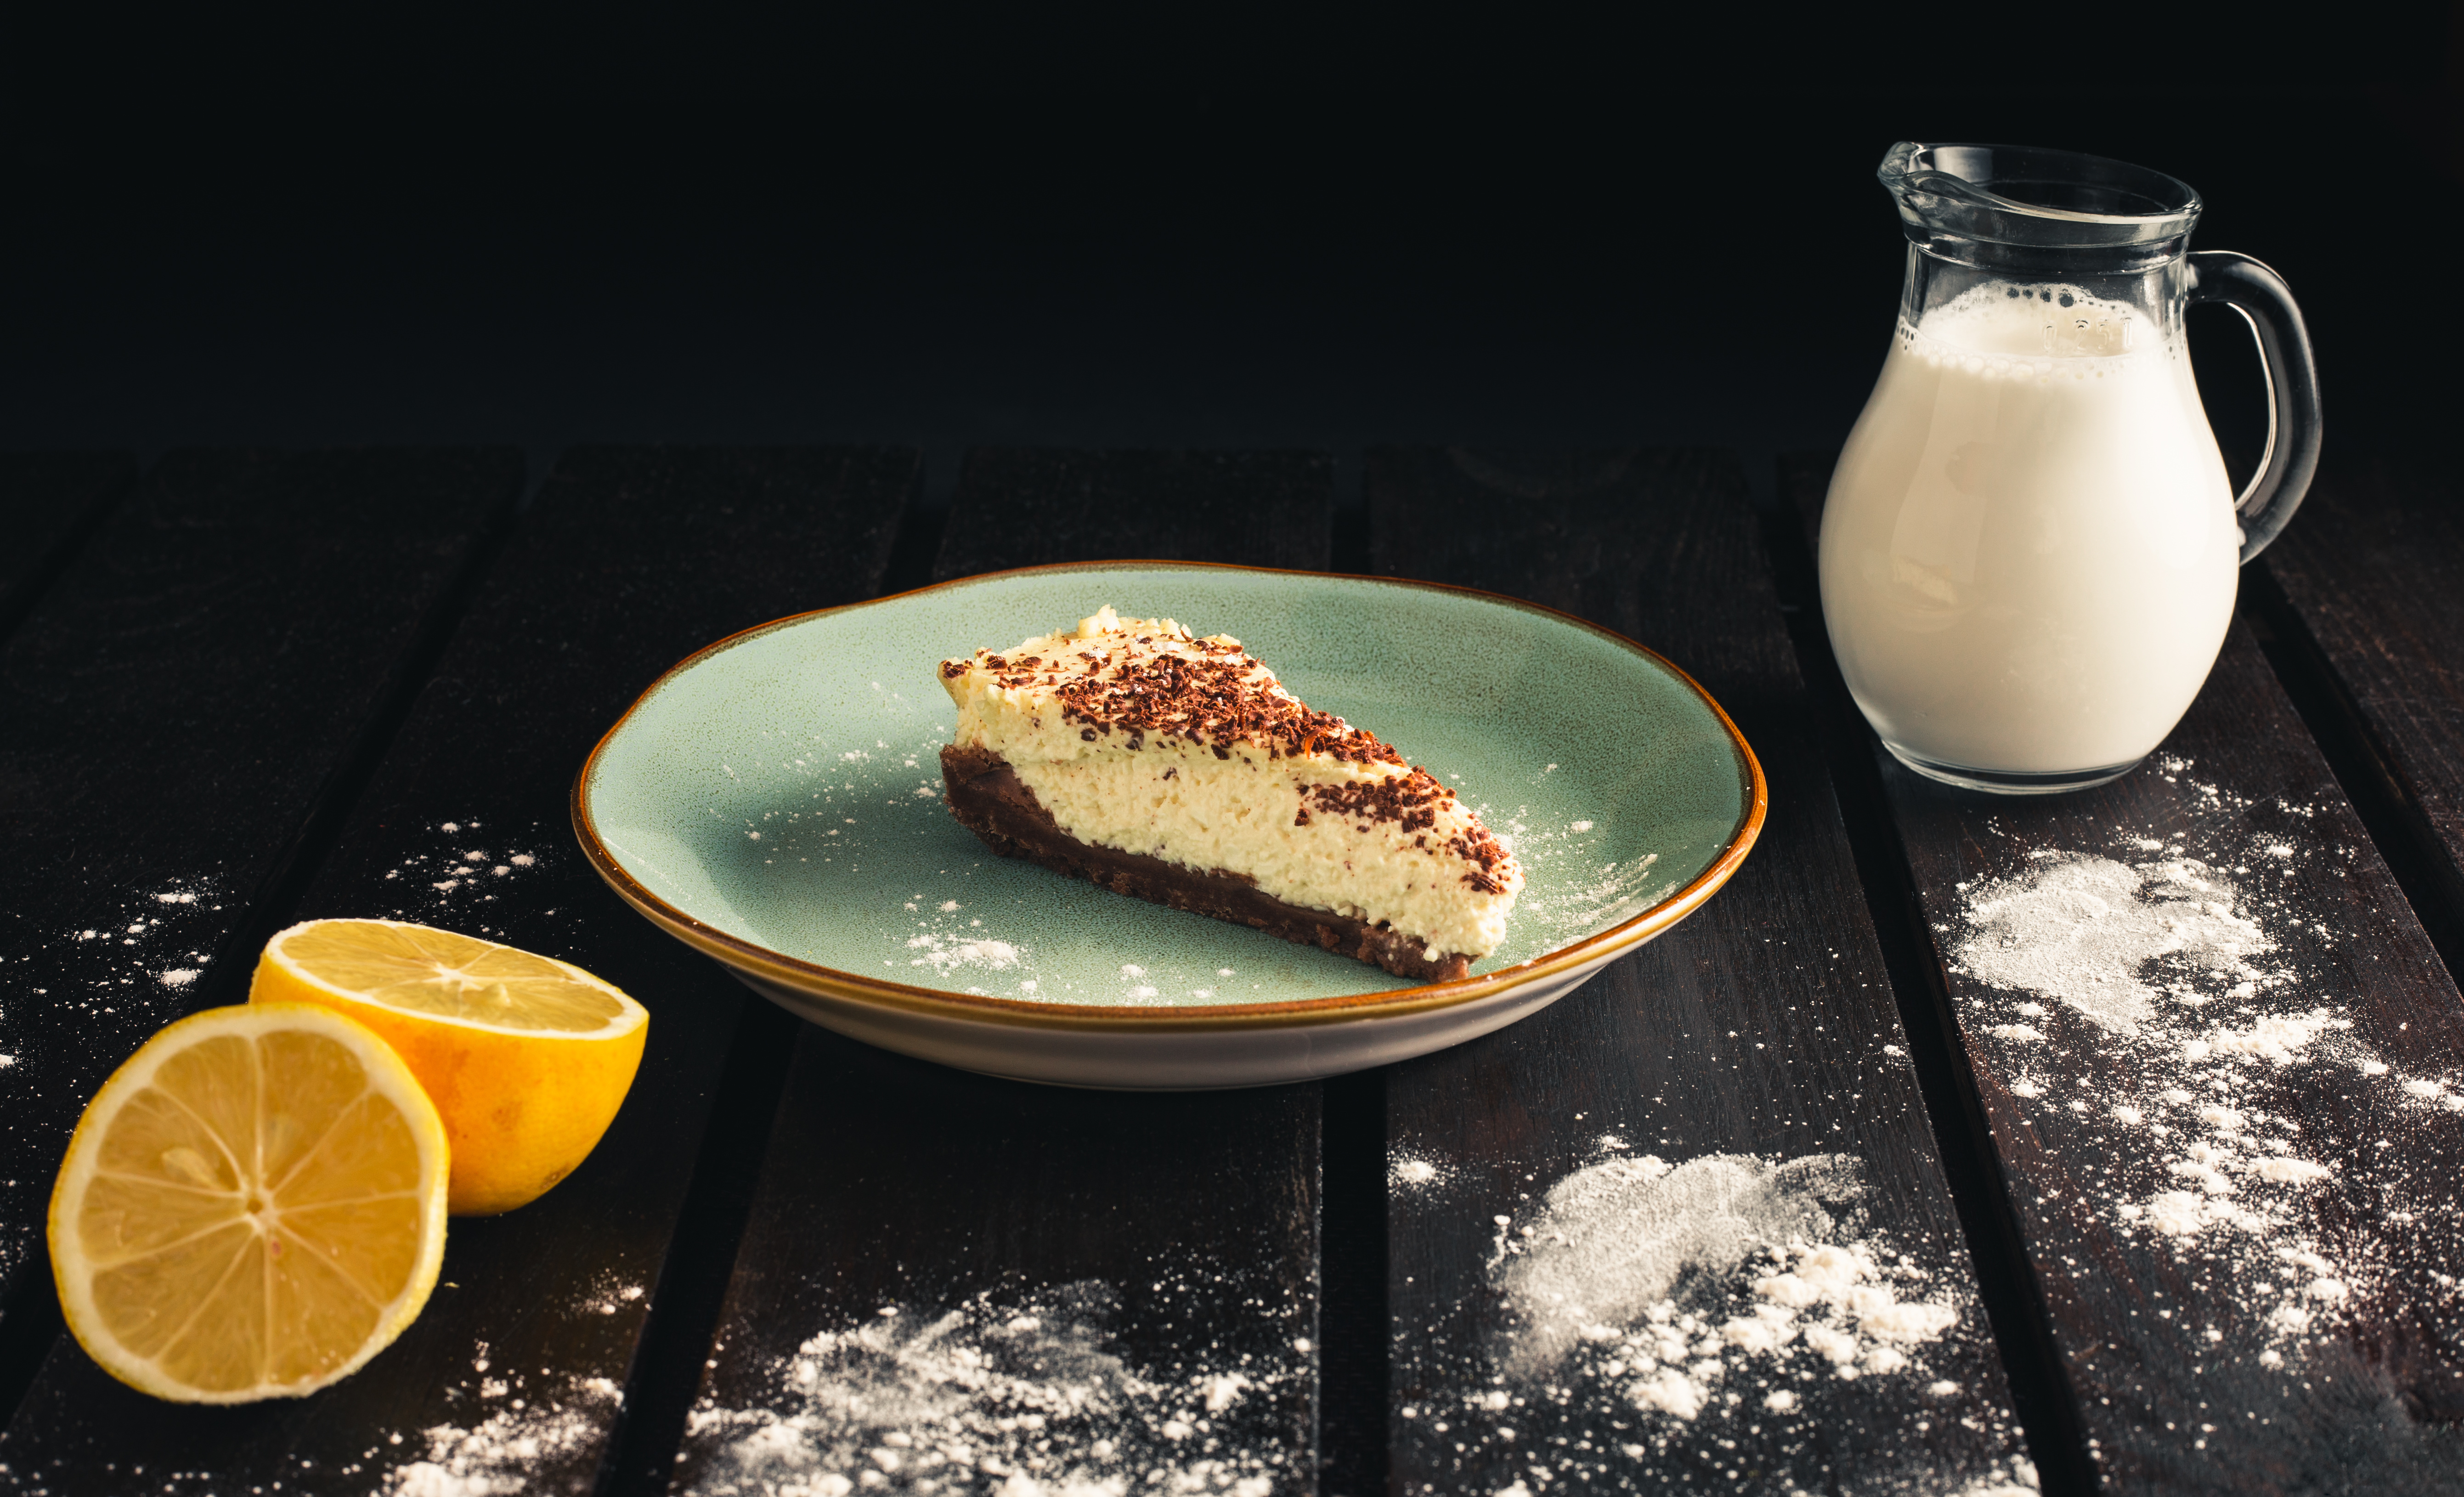 Product photo of chocolate bio cheesecake with lemon, milk, caster sugar on wooden background. Dark food Photography of sweet and illuminated dessert.